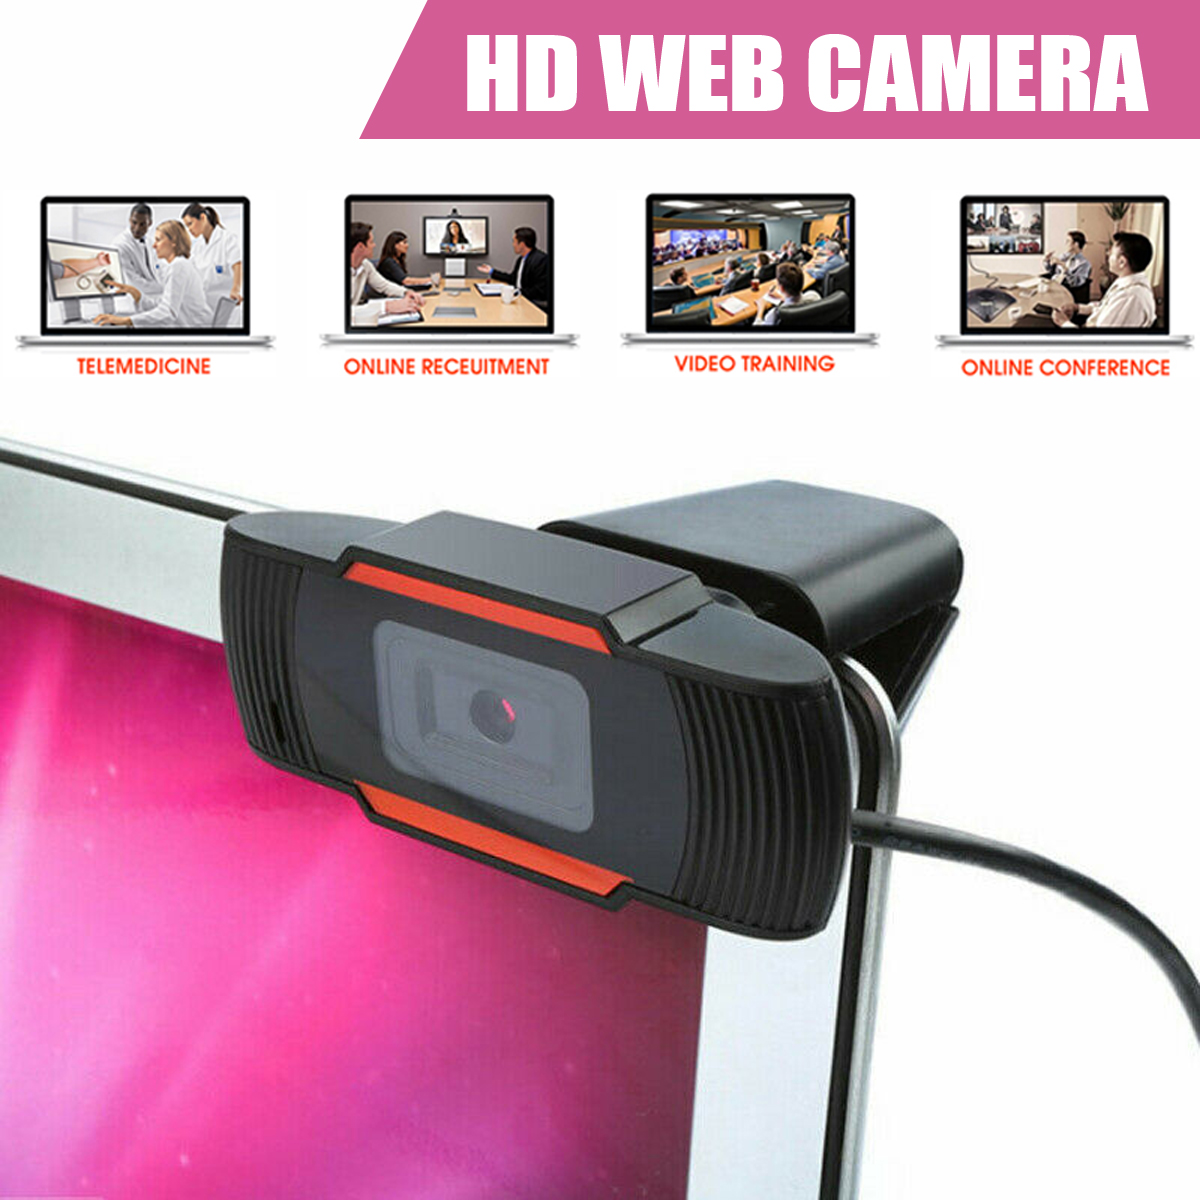 Bakeey-30-Degrees-Rotatable-20-HD-Webcam-1080p-USB-Camera-Video-Recording-Web-Camera-with-Microphone-1684648-1